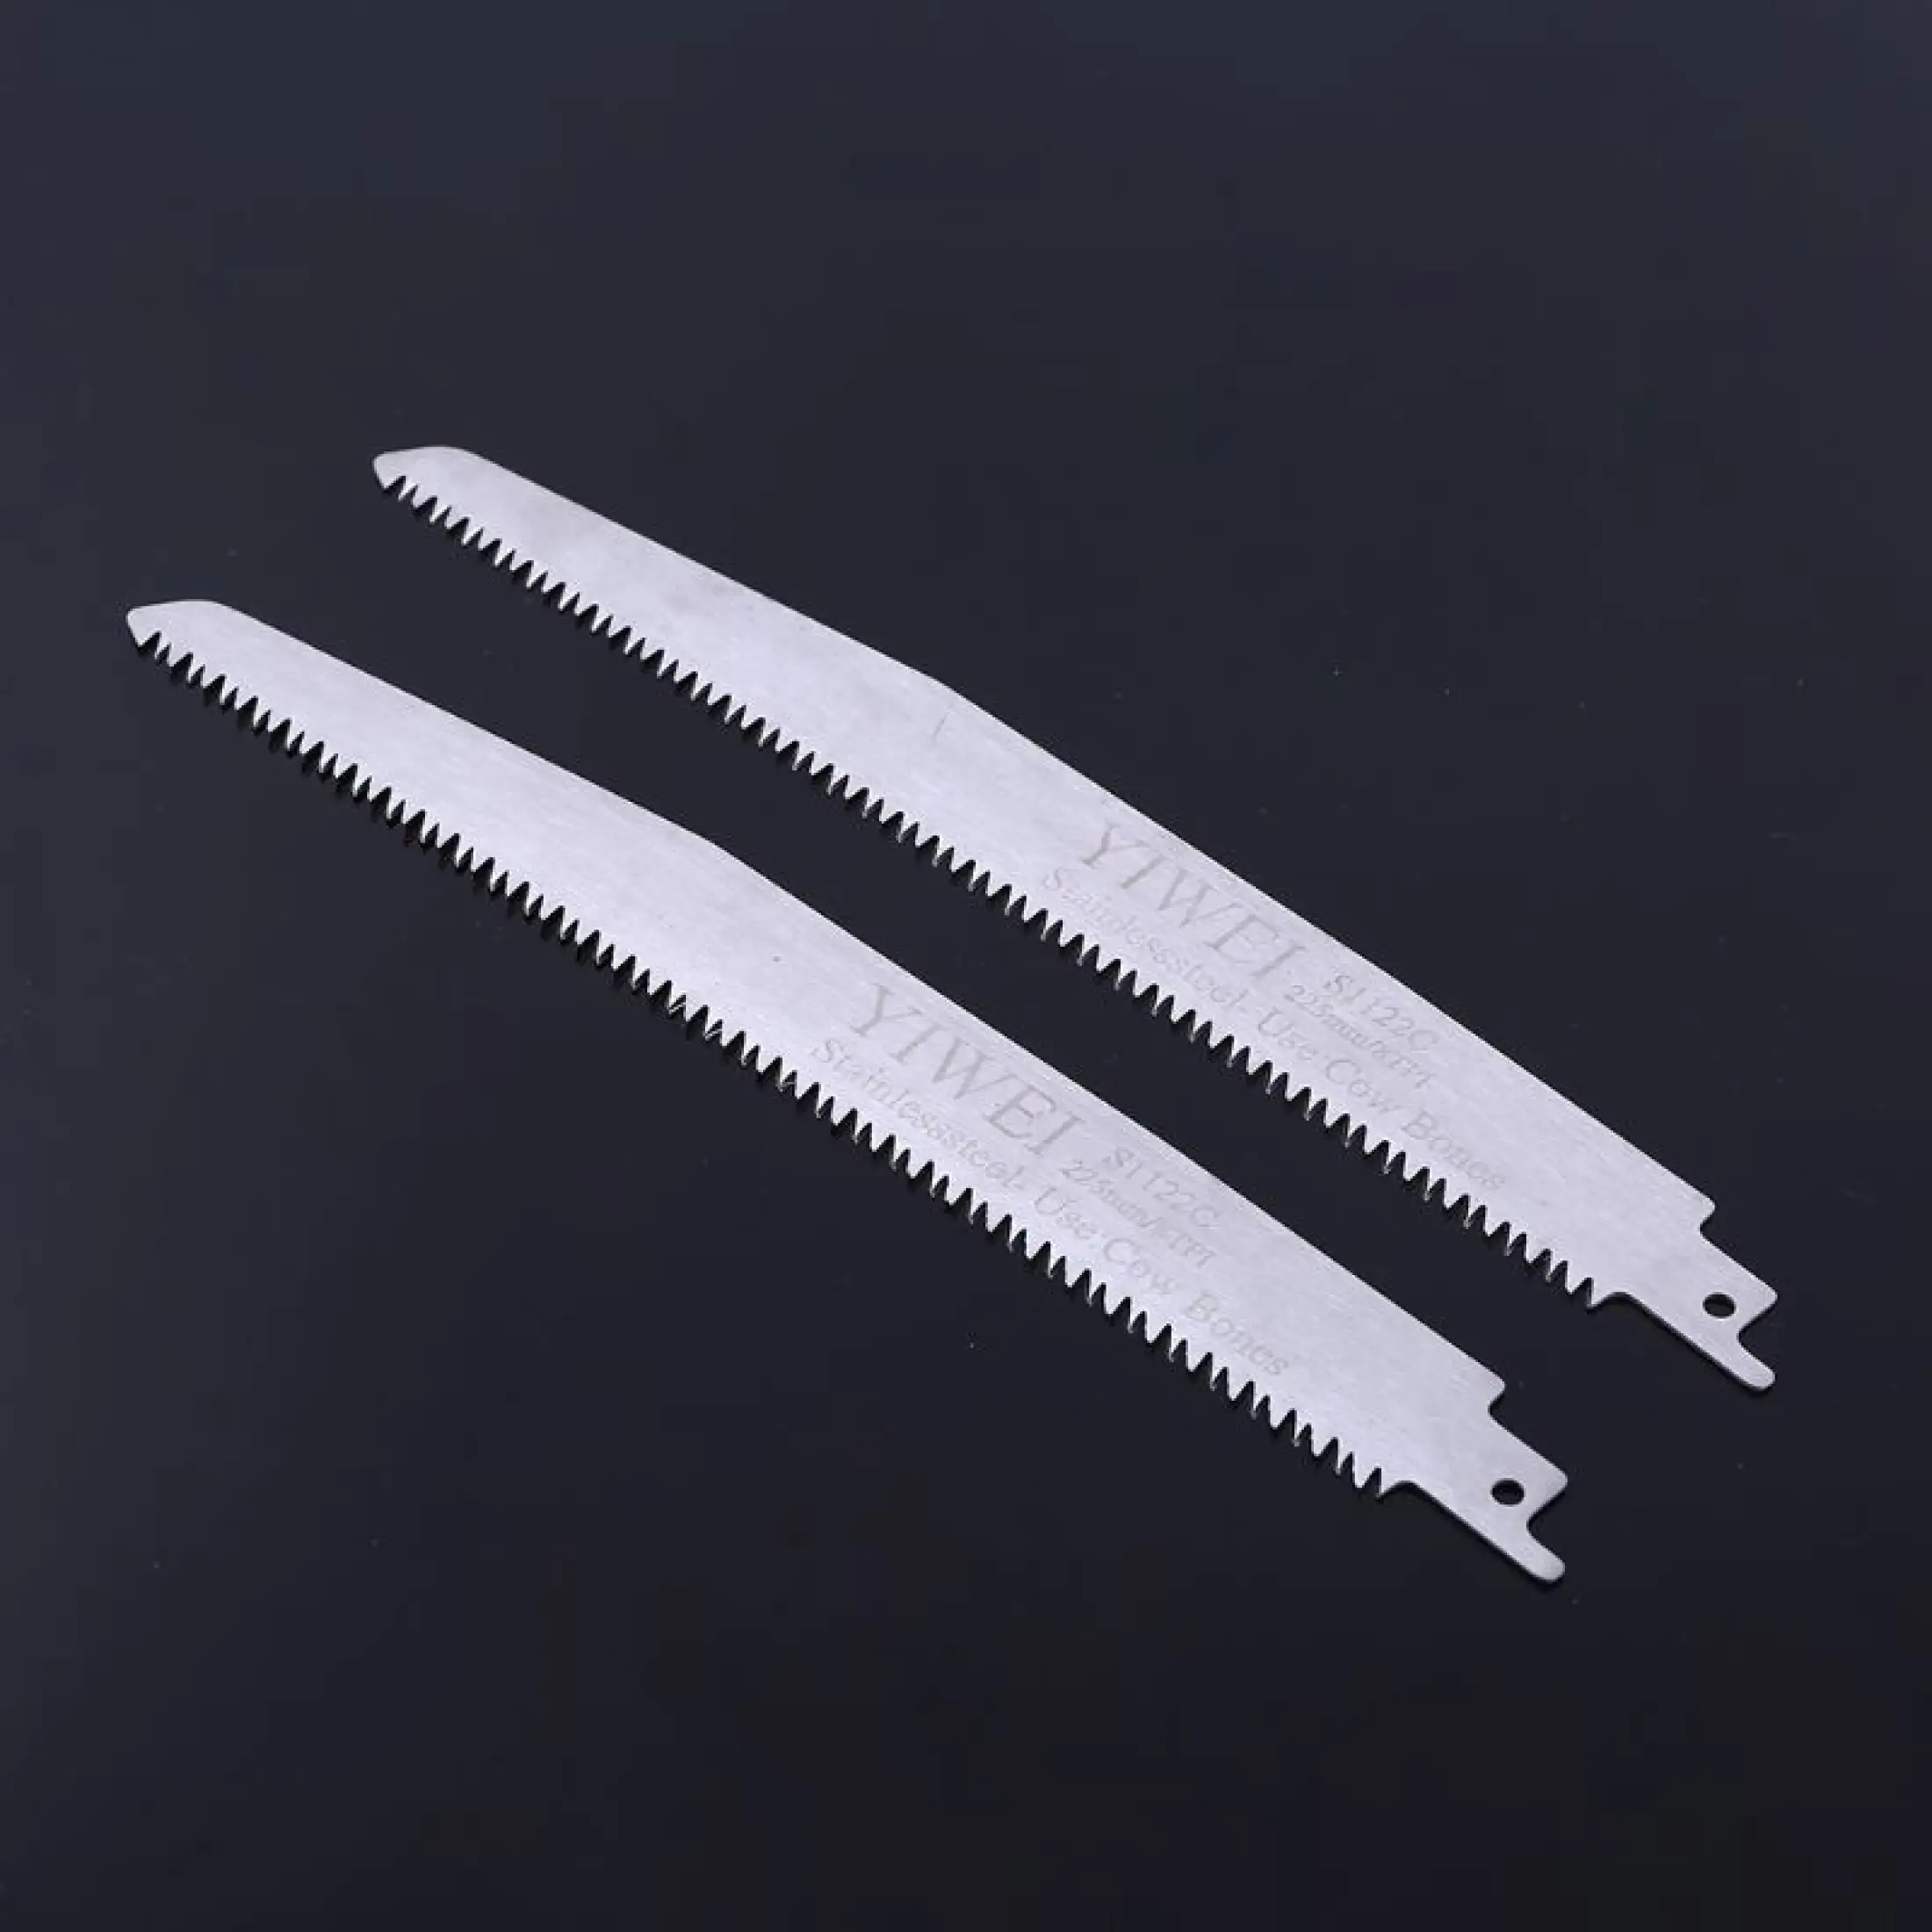 2 Pcs S1122C Stainless Steel Reciprocating Saw Blades For Cutting Bone Meat Wood